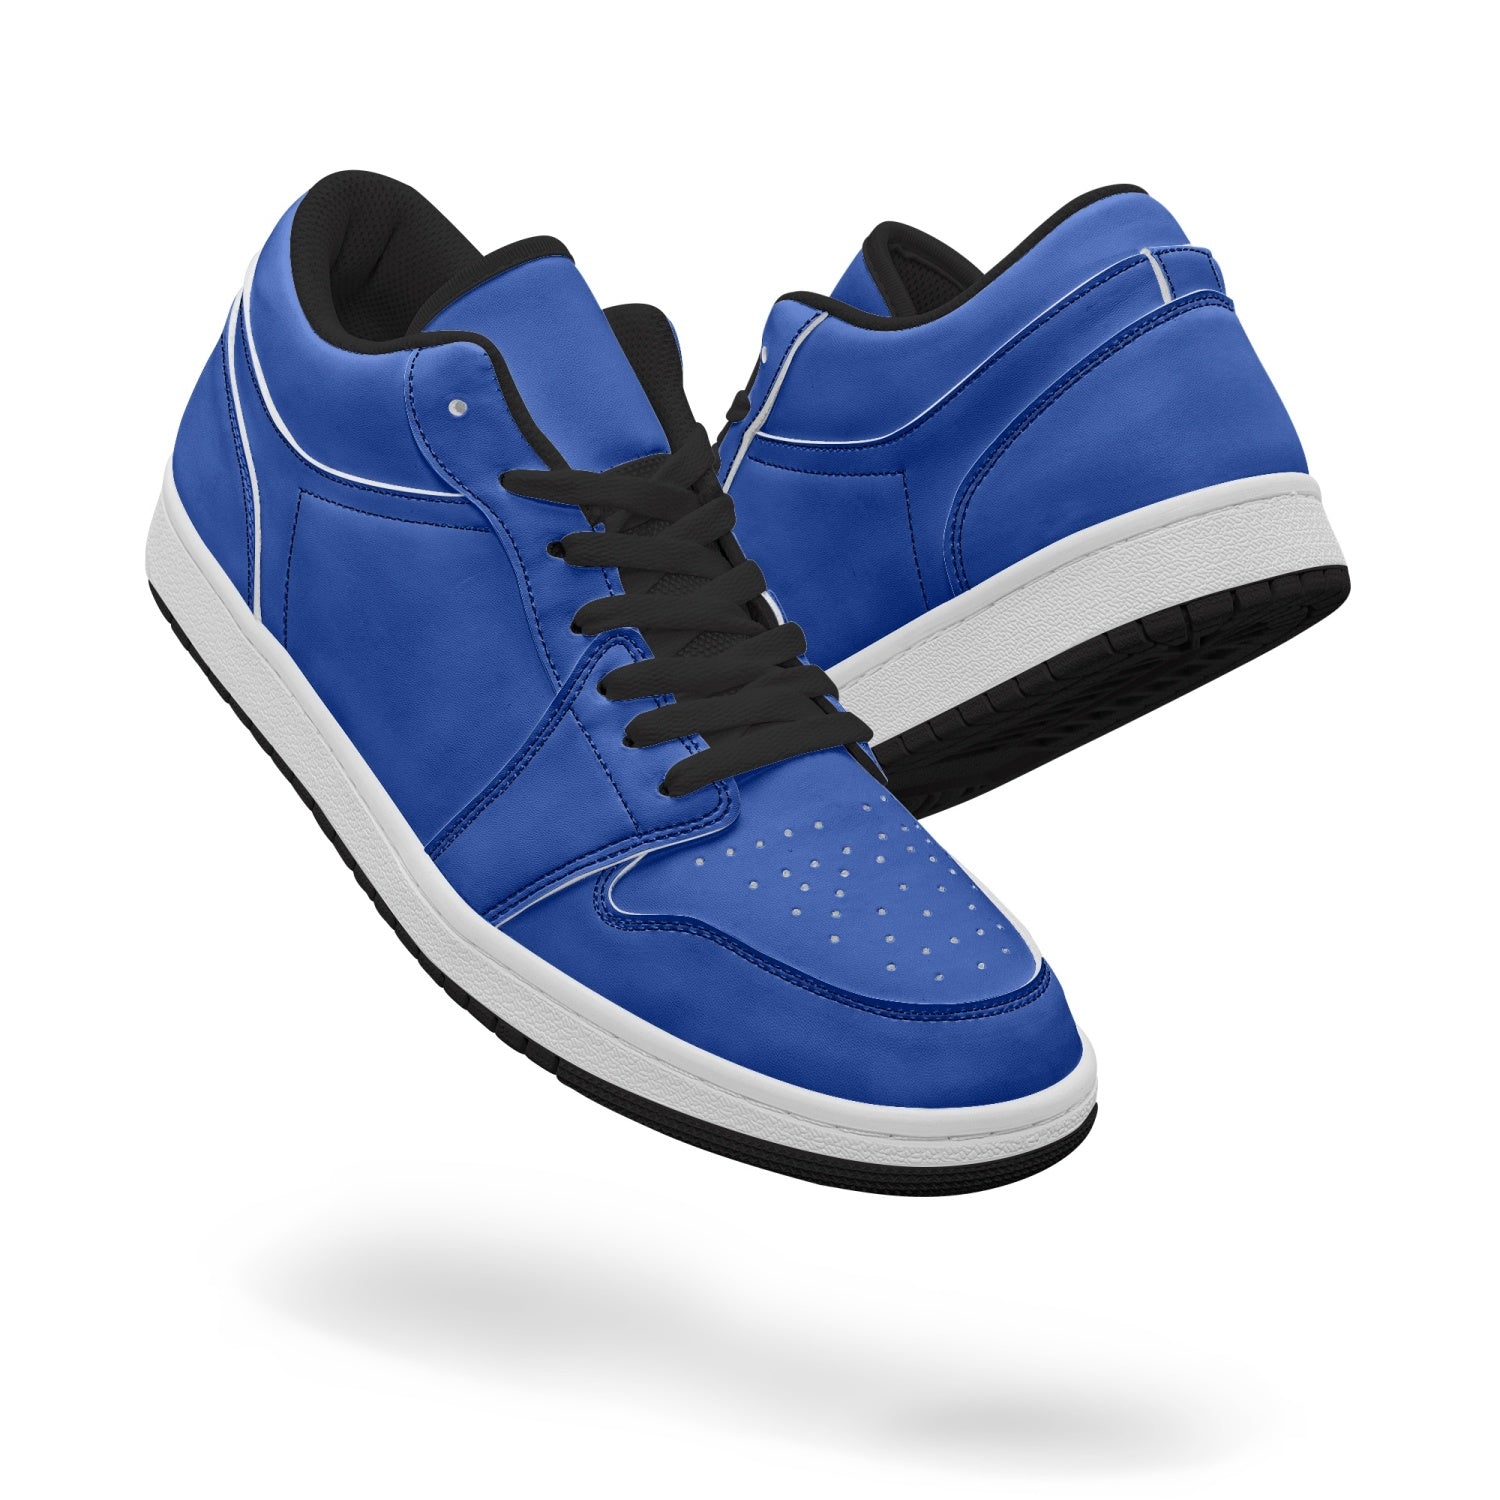 Israeli Blue Low-Top Leather Sneakers black laces both